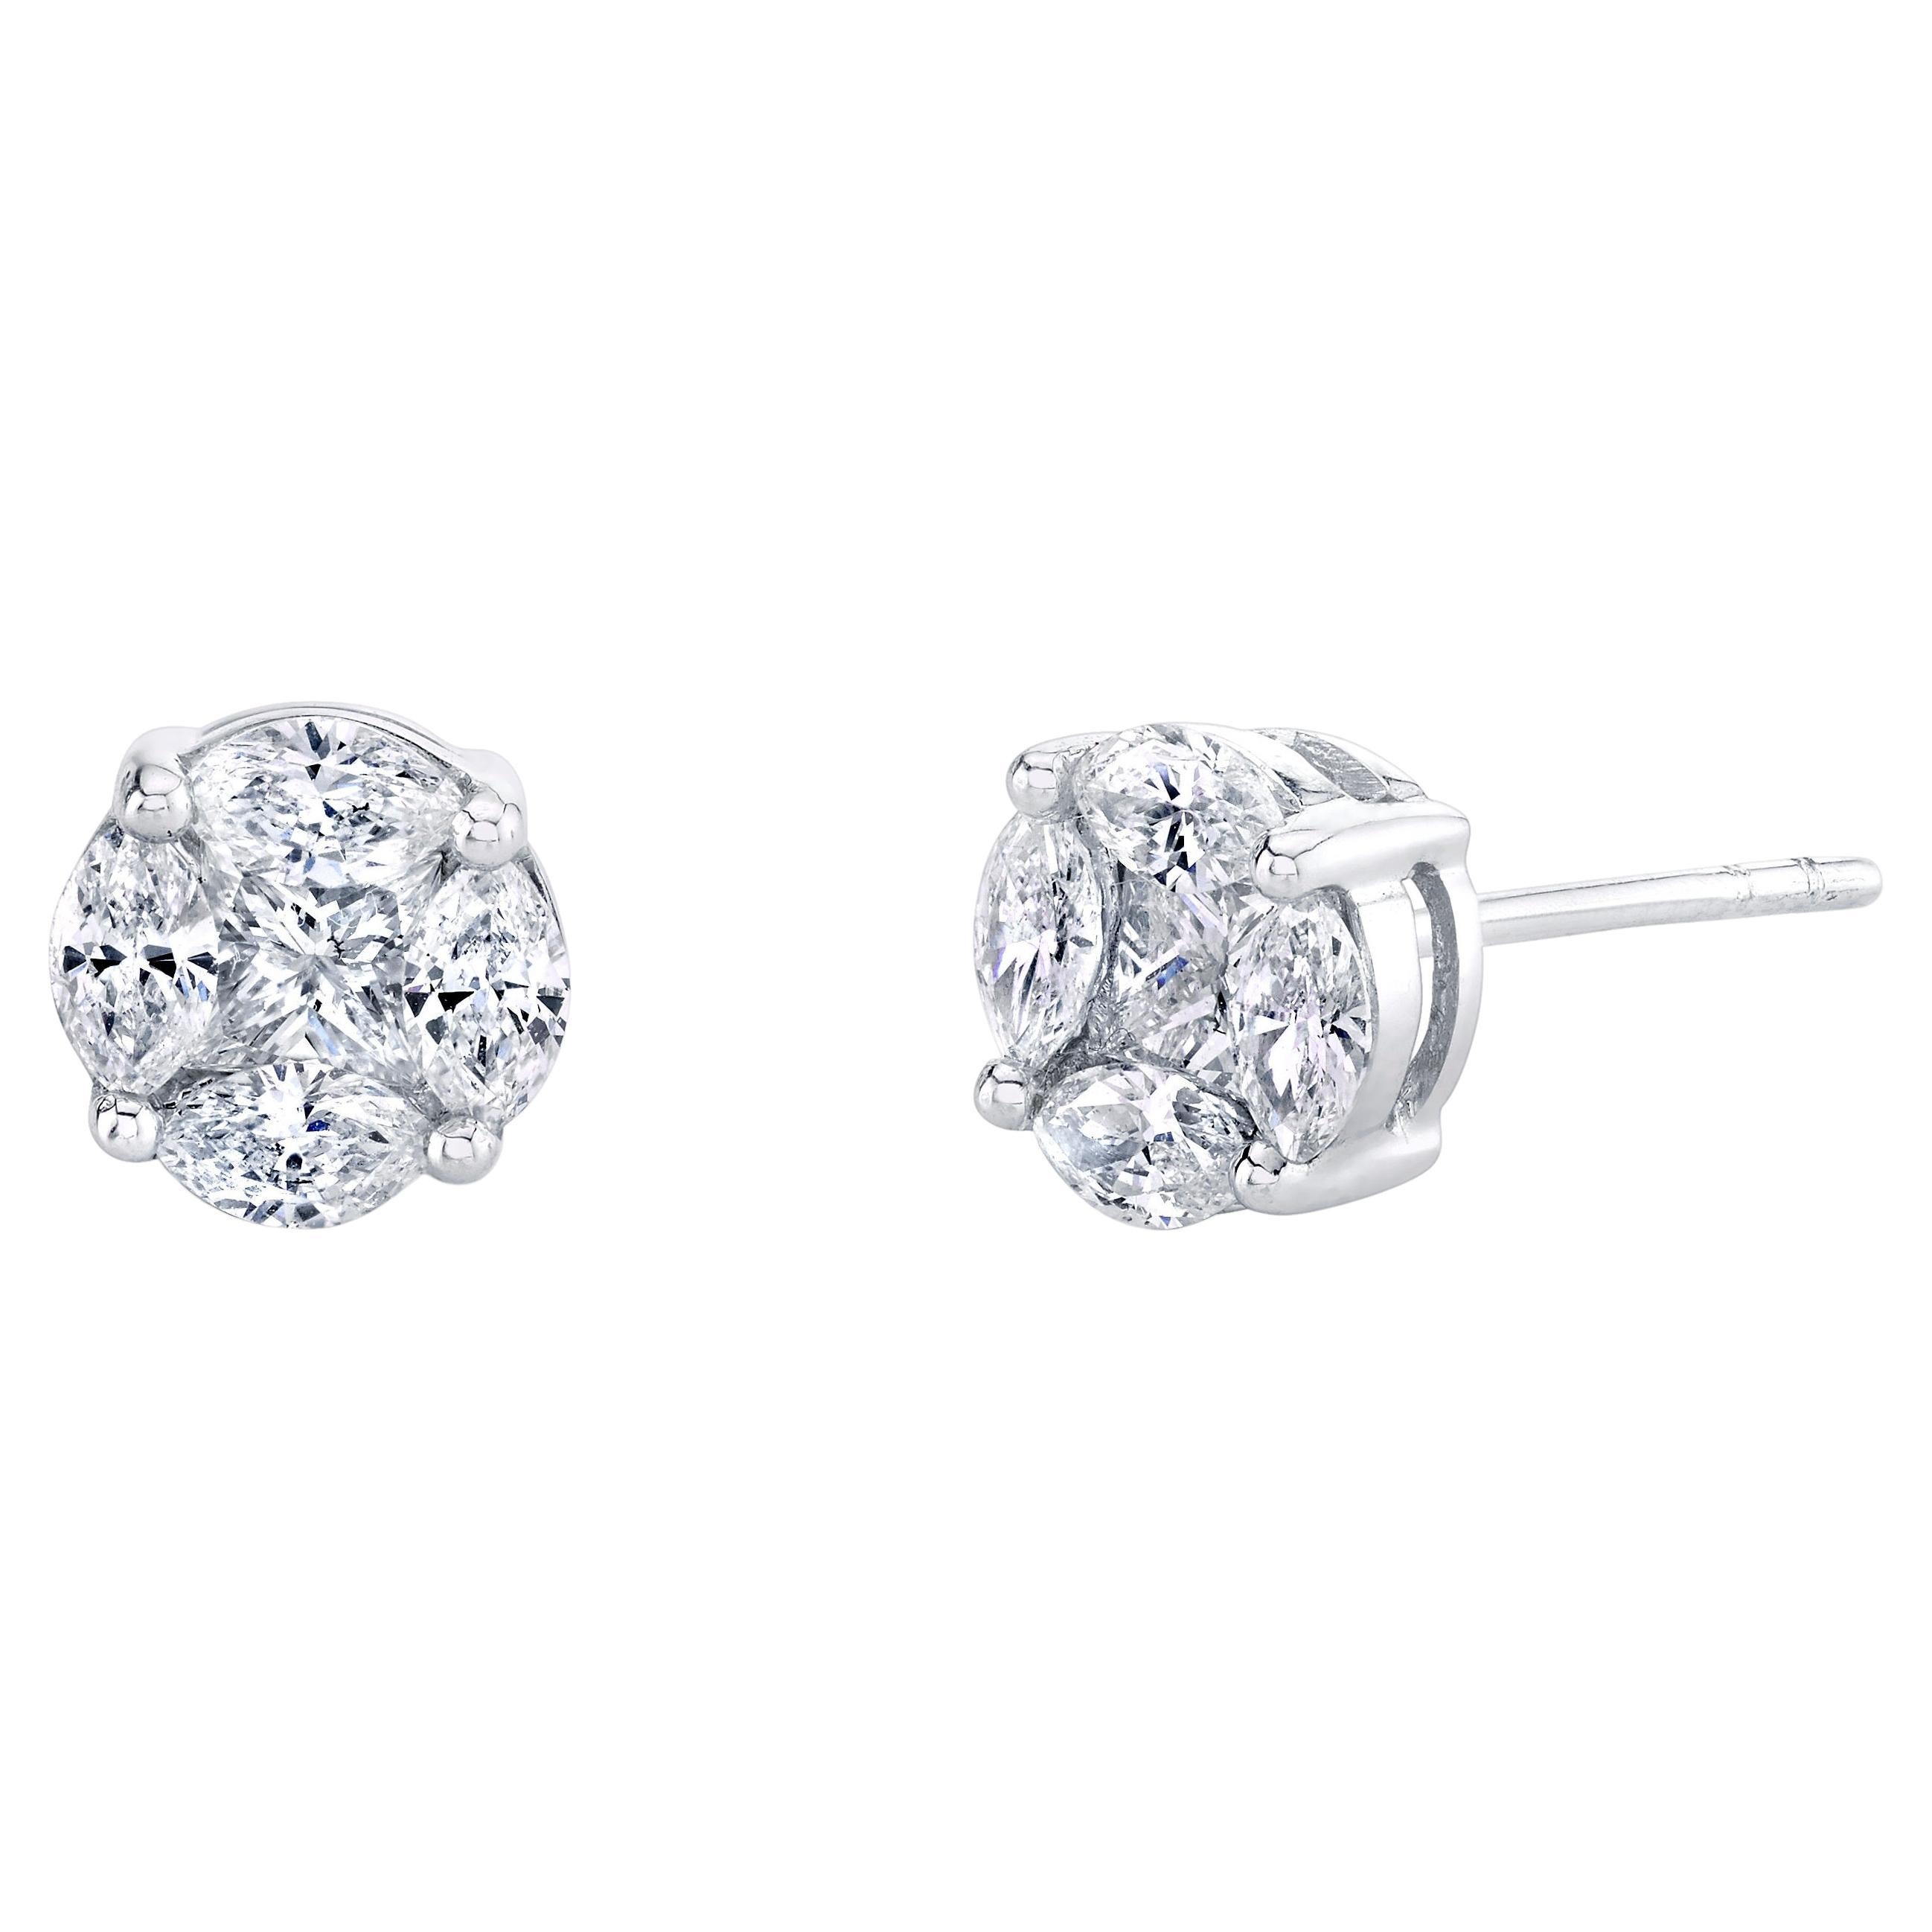 Diamond Illusion Stud Earrings in White Golds, 78 Carat Total 